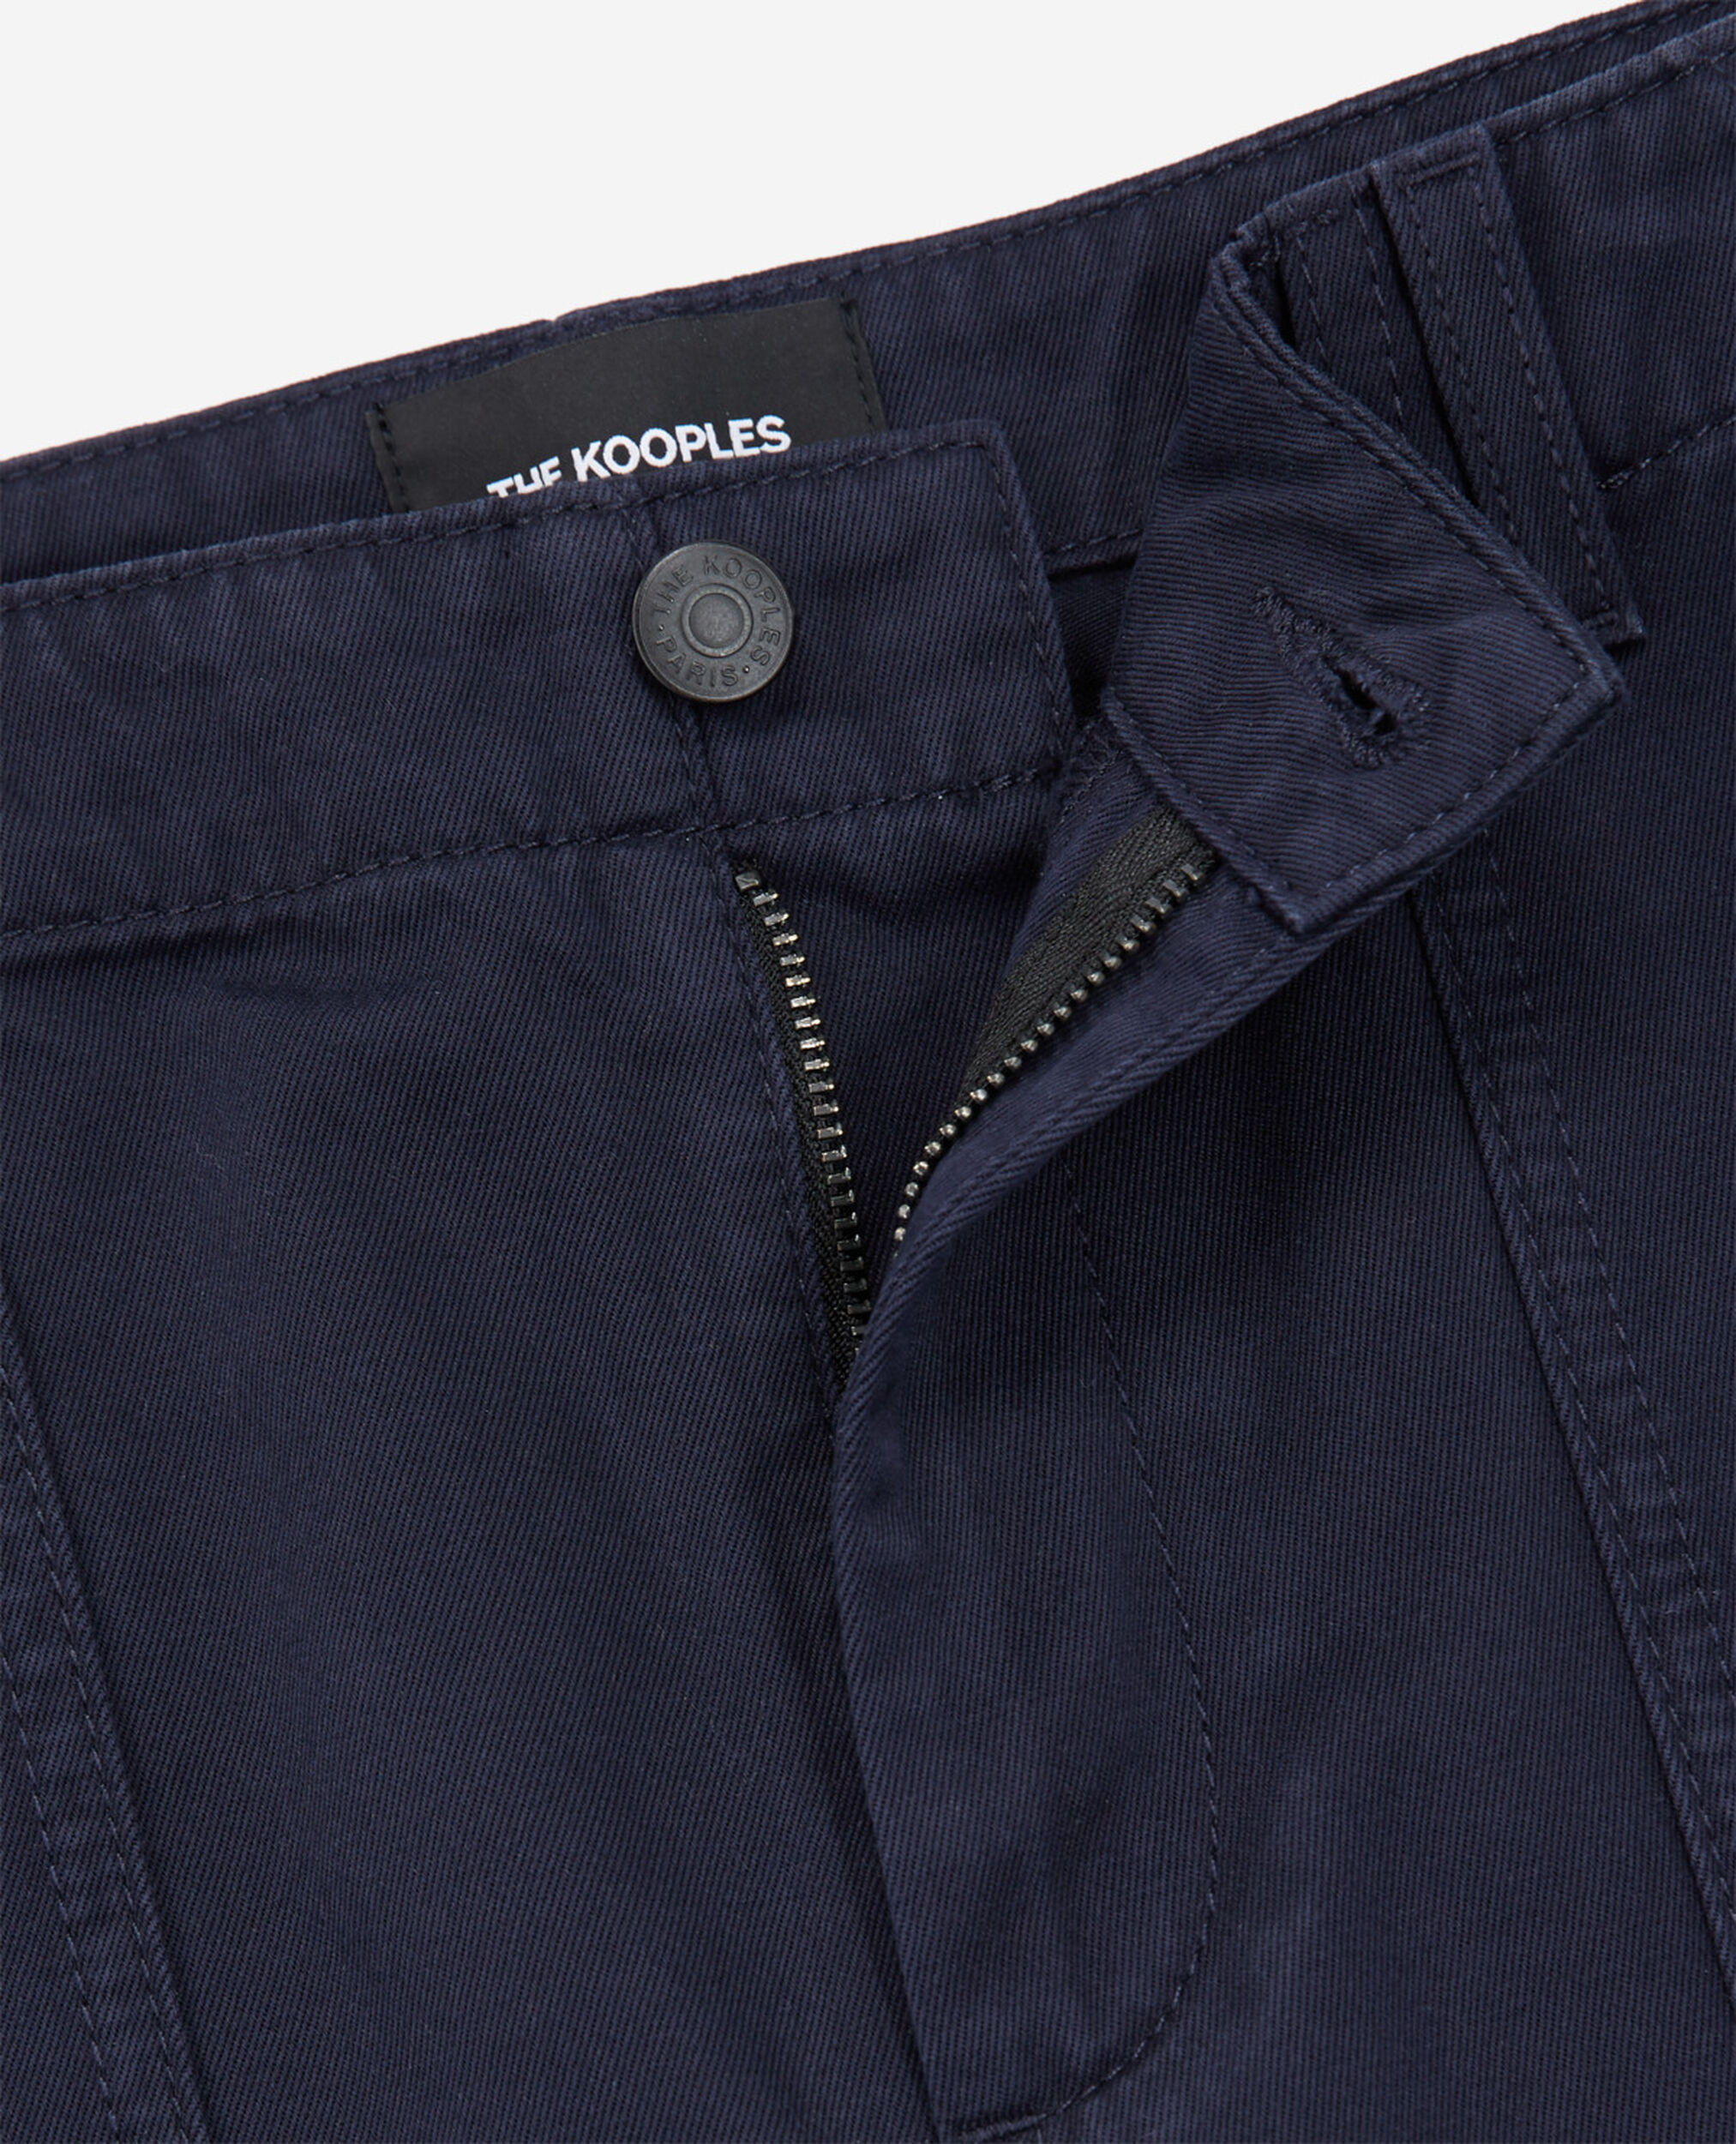 Long navy blue cotton shorts with four pockets, NAVY, hi-res image number null